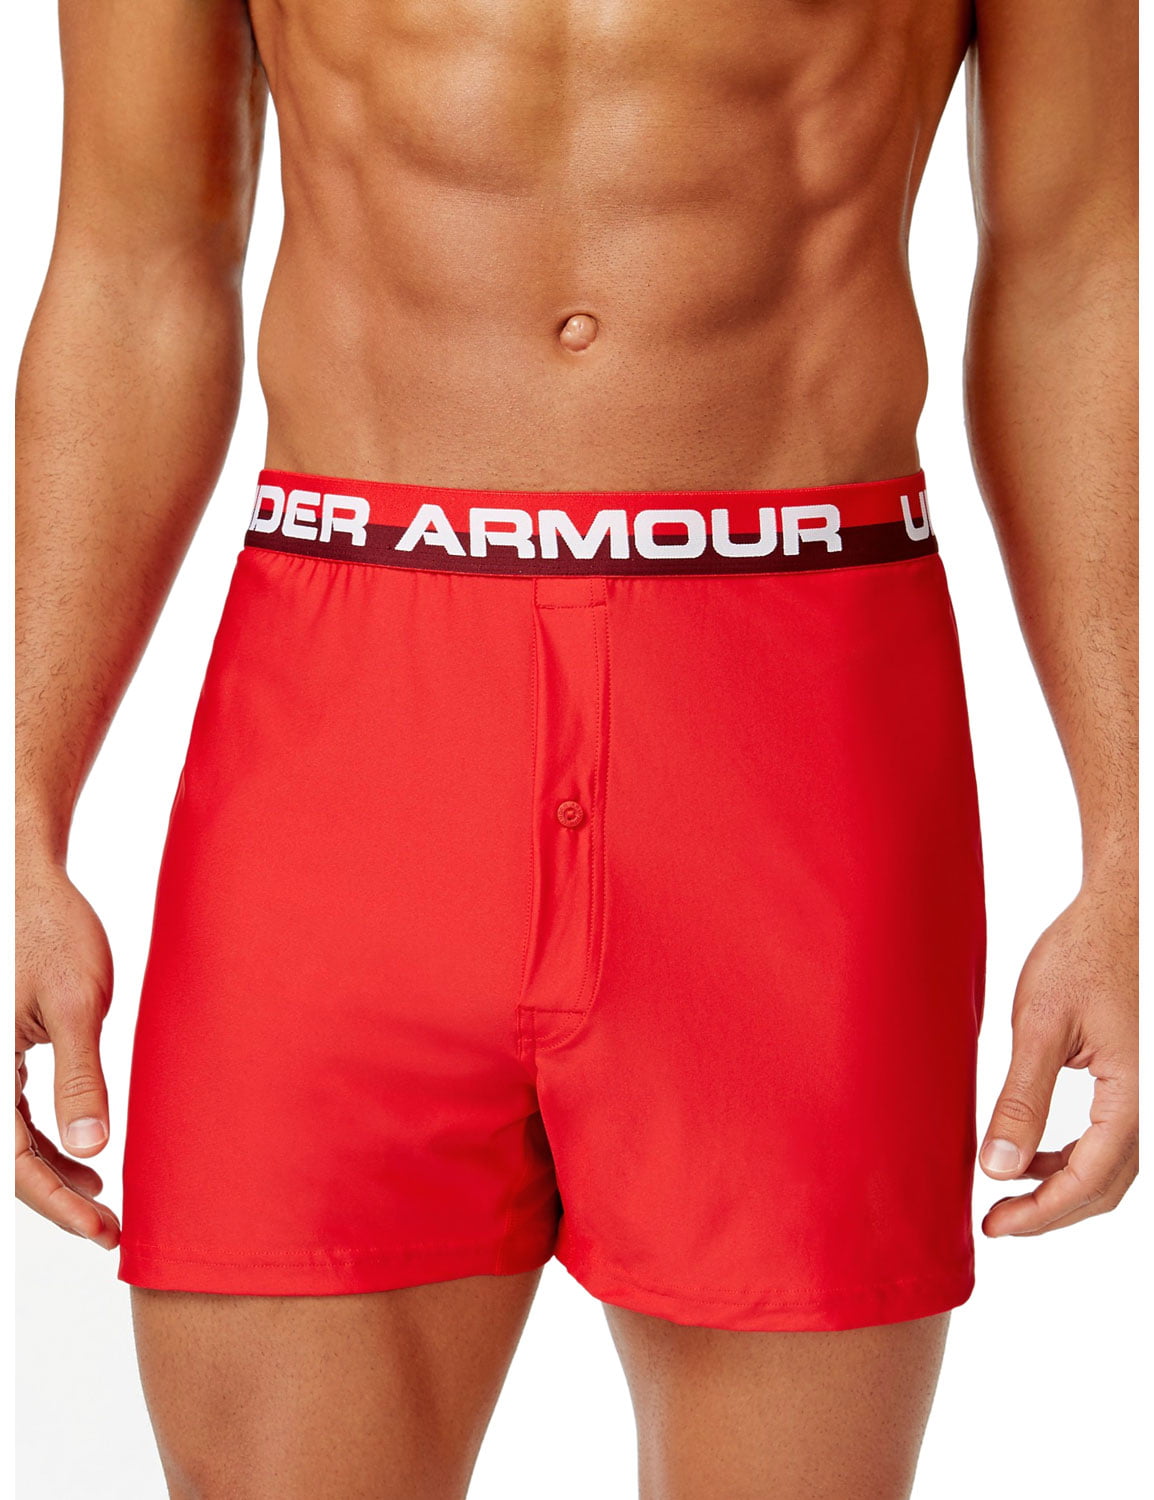 Loose Fit Boxer Shorts Underwear 